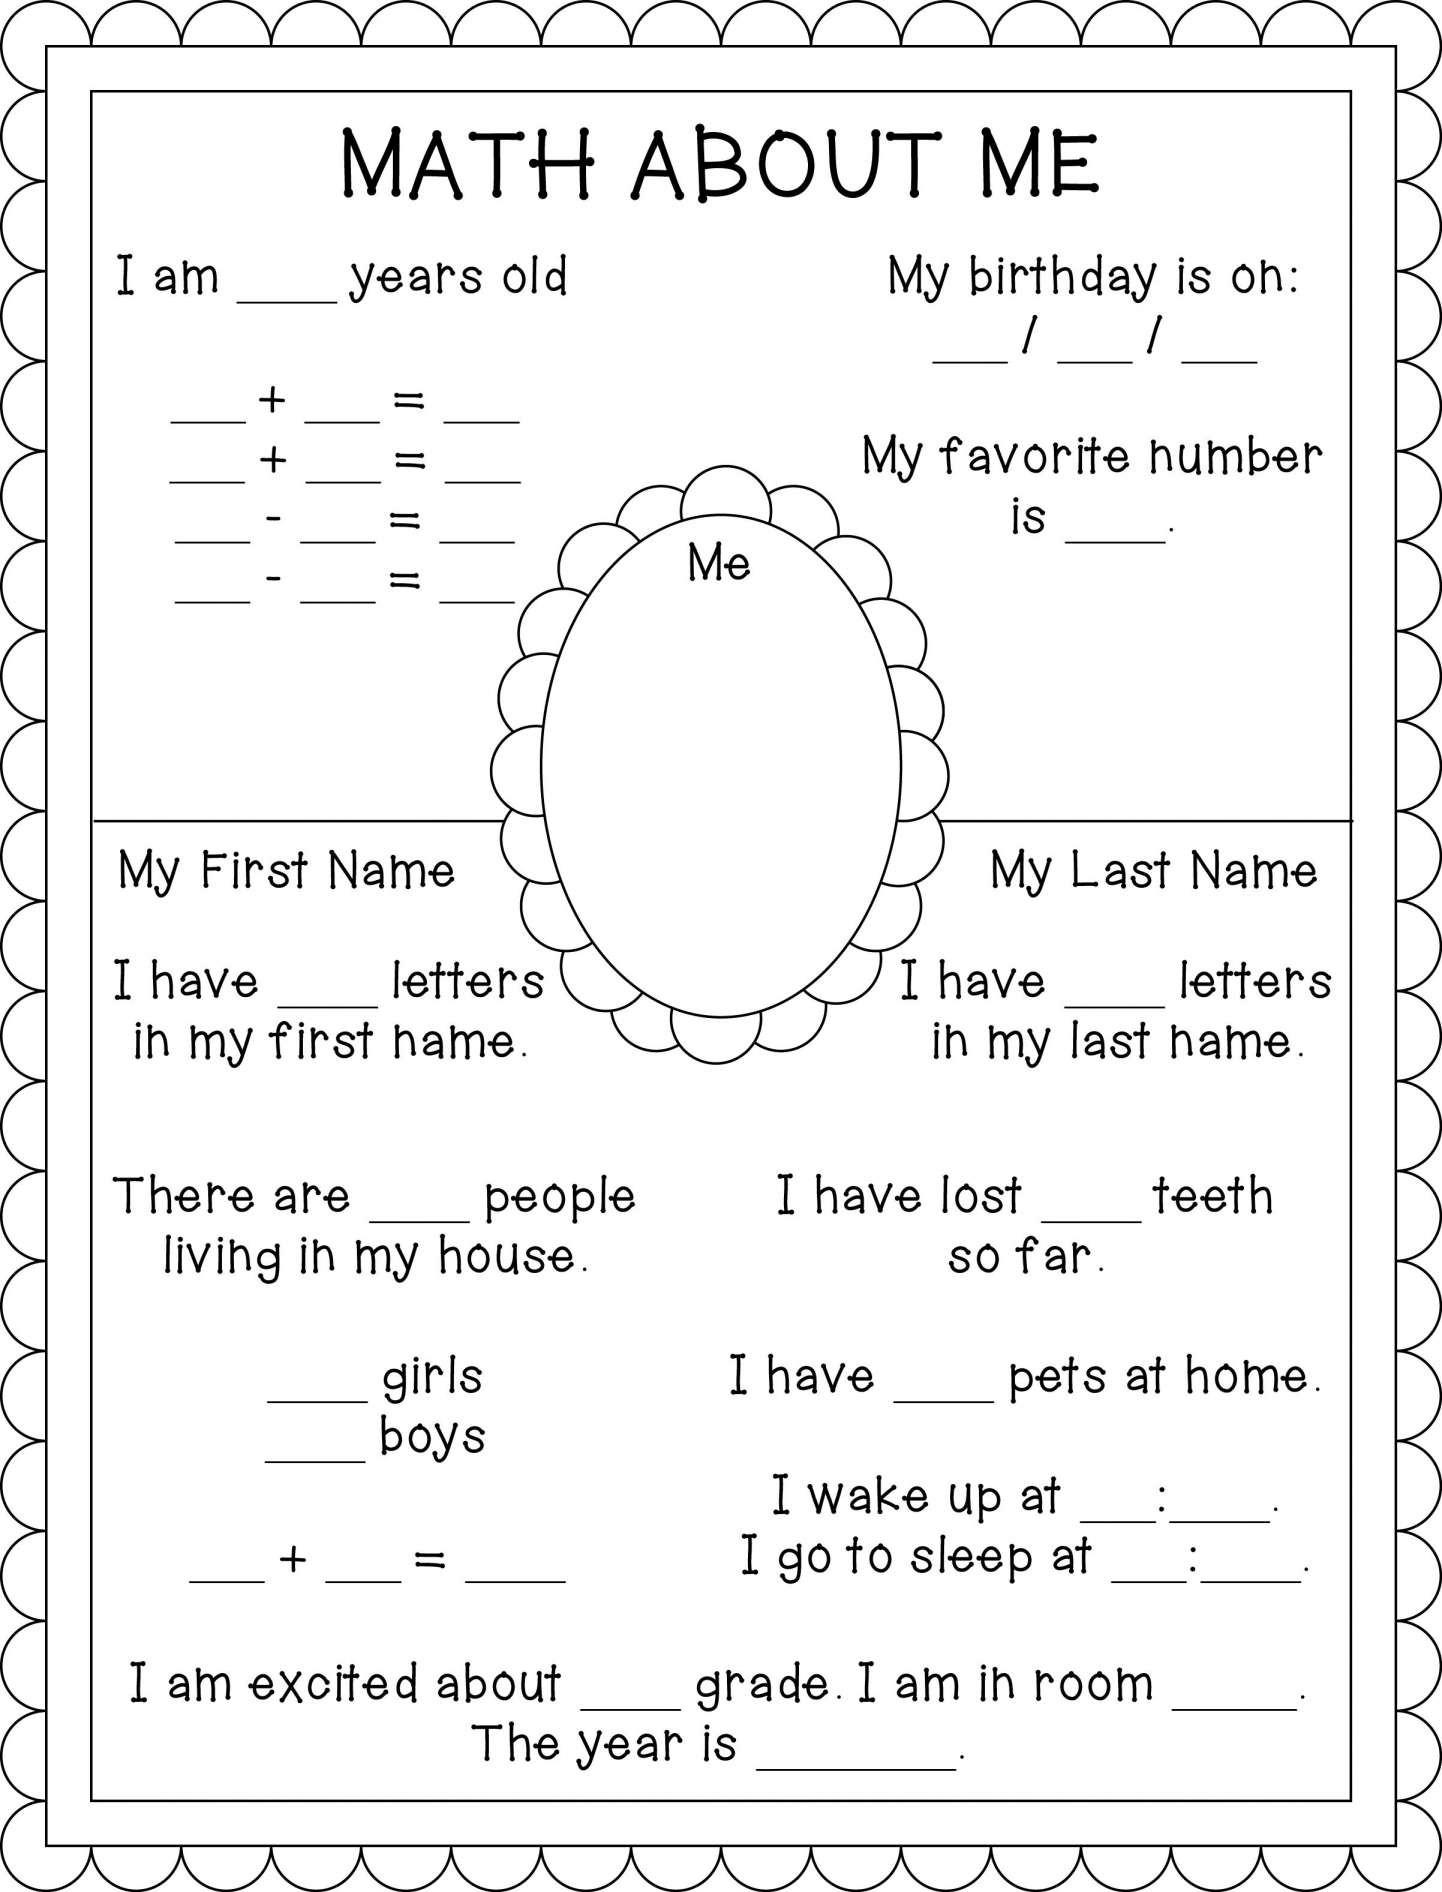 Ou Ow Worksheets 3rd Grade Ou and Ow Worksheets for 2nd Grade